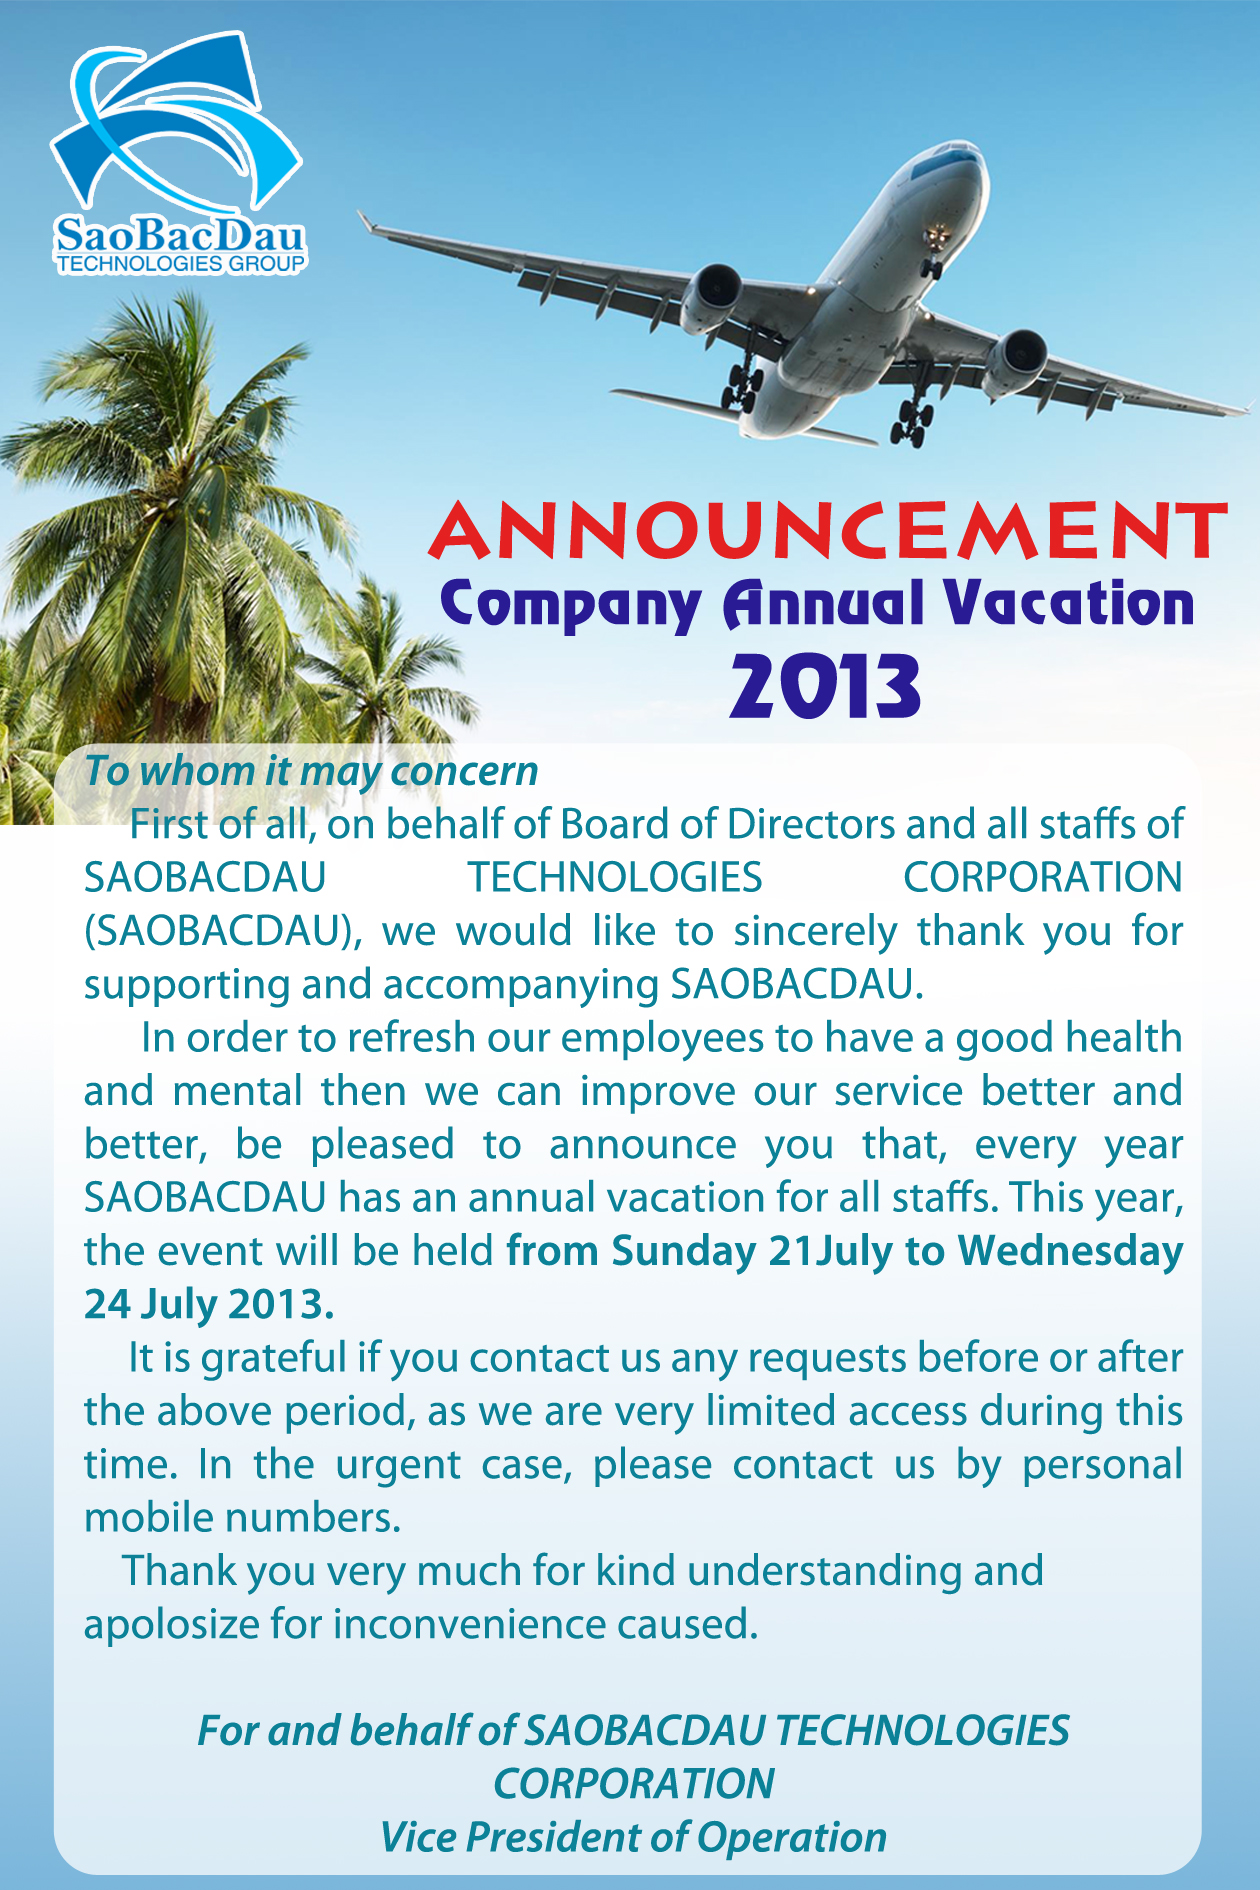 ANNOUNCEMENT  Re: Company Annual Vacation – 2013